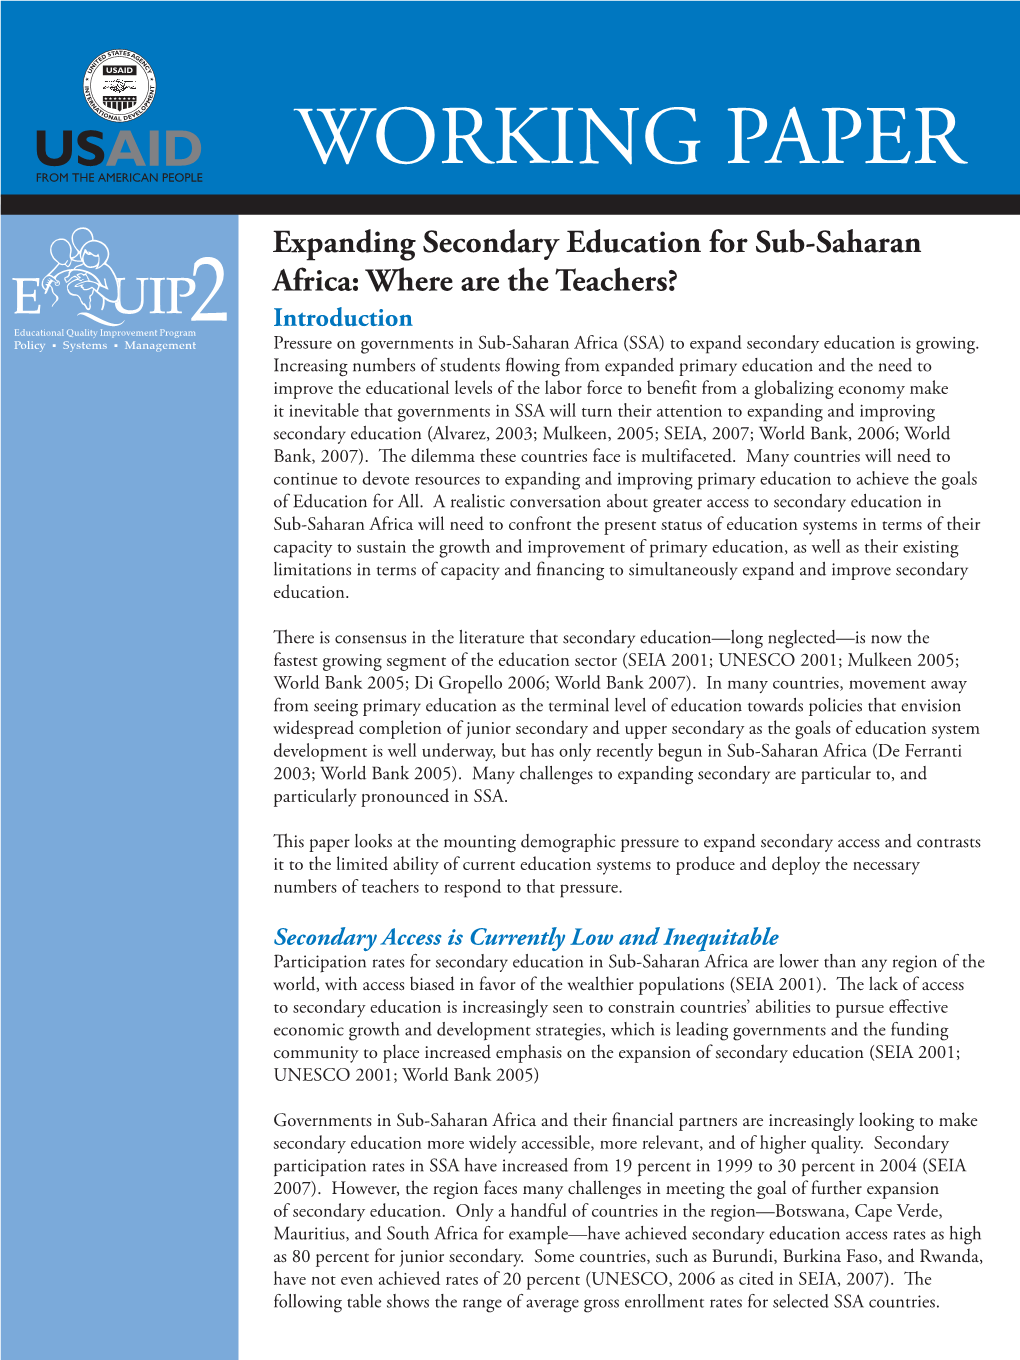 Working Paper: Expanding Secondary Education for Sub-Saharan Africa: Where Are the Teachers?